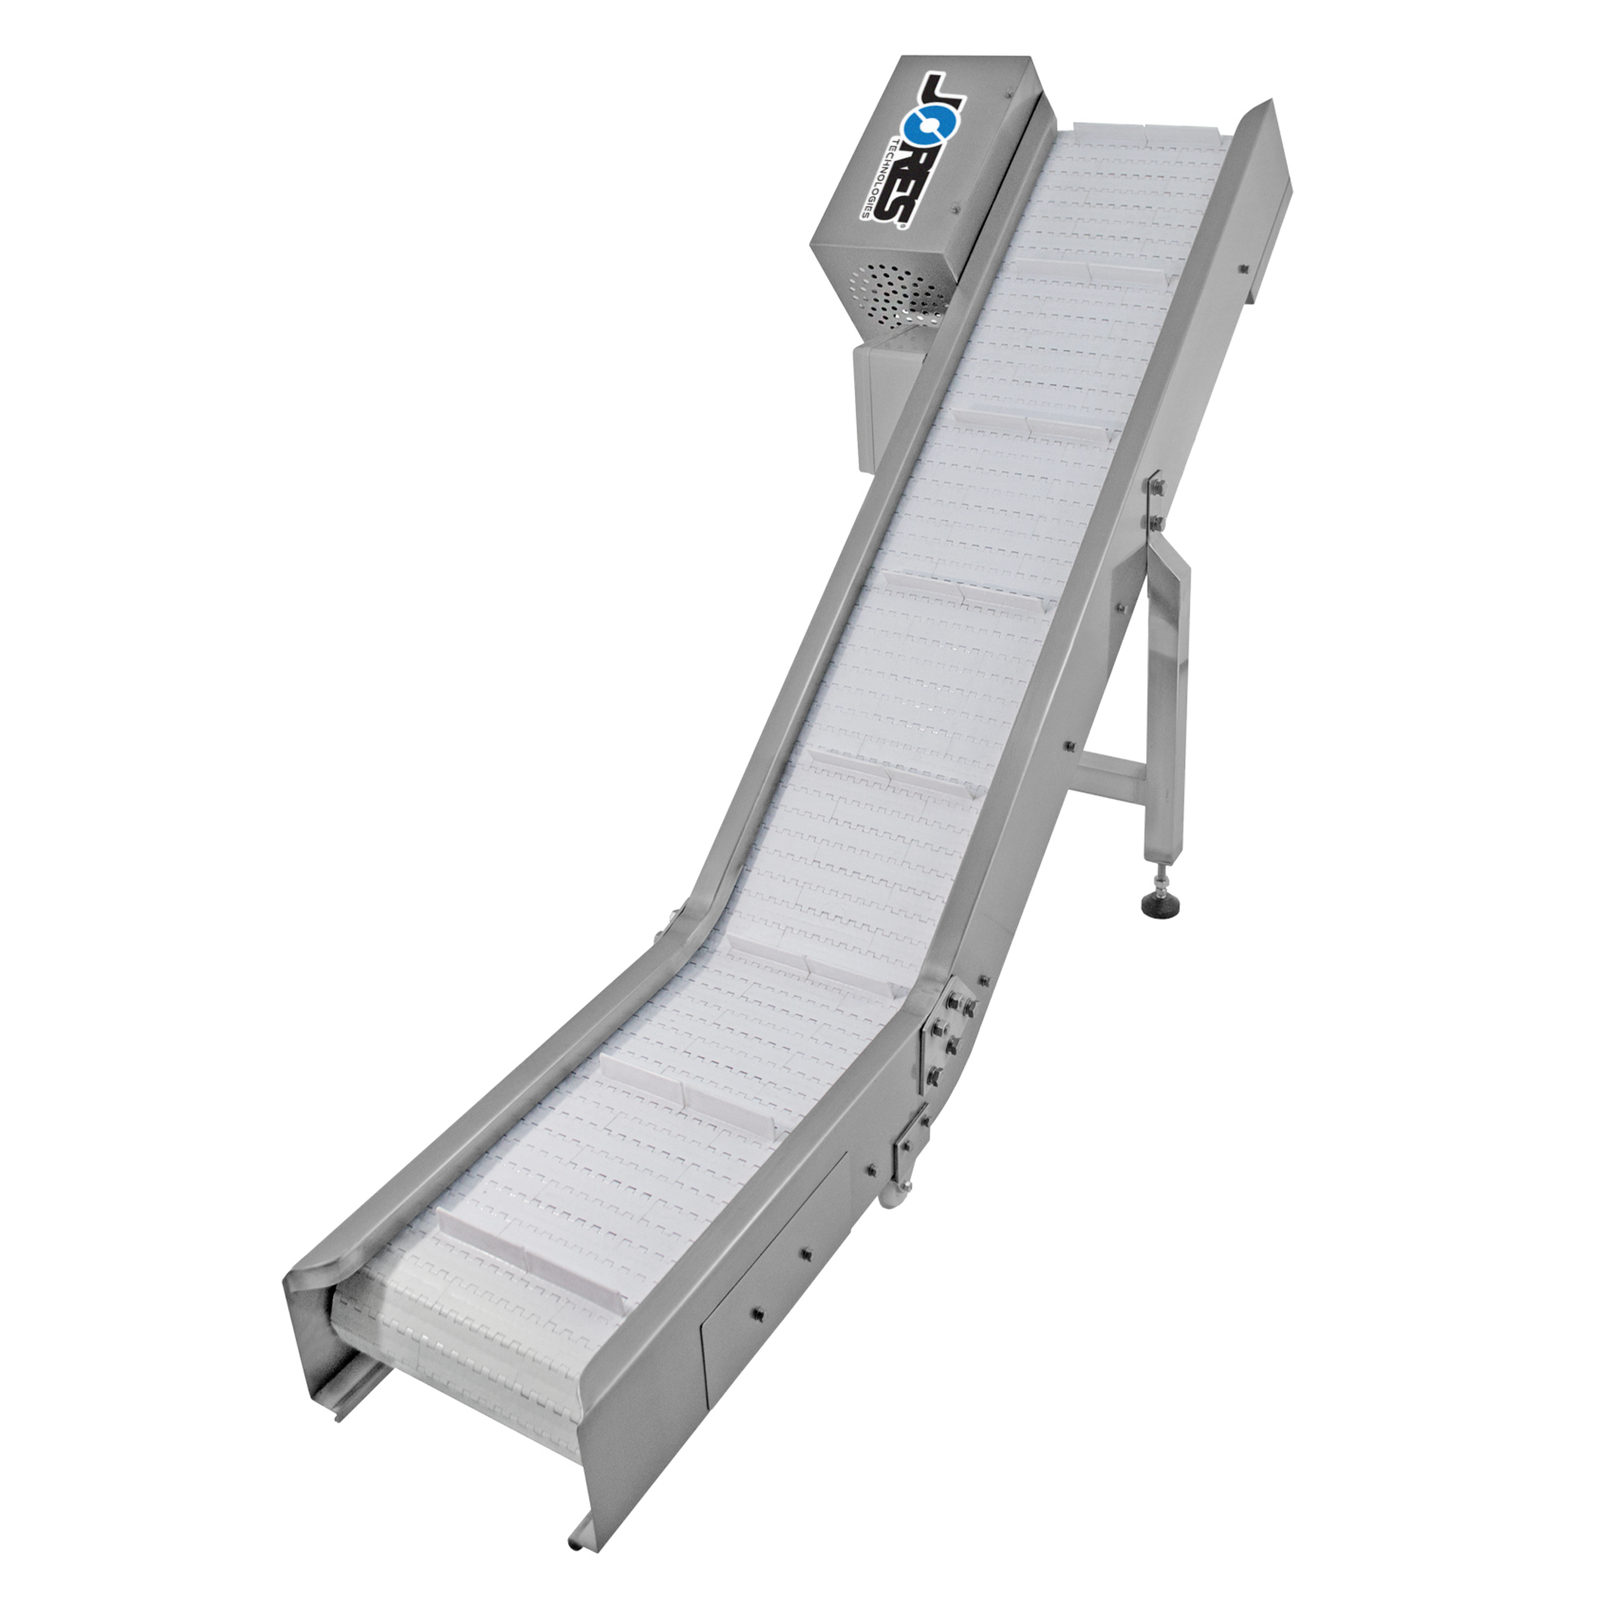 motorized take away incline conveyor with stainless steel frame and white pvc conveyor chain with blue JORES TECHNOLOGIES® logo